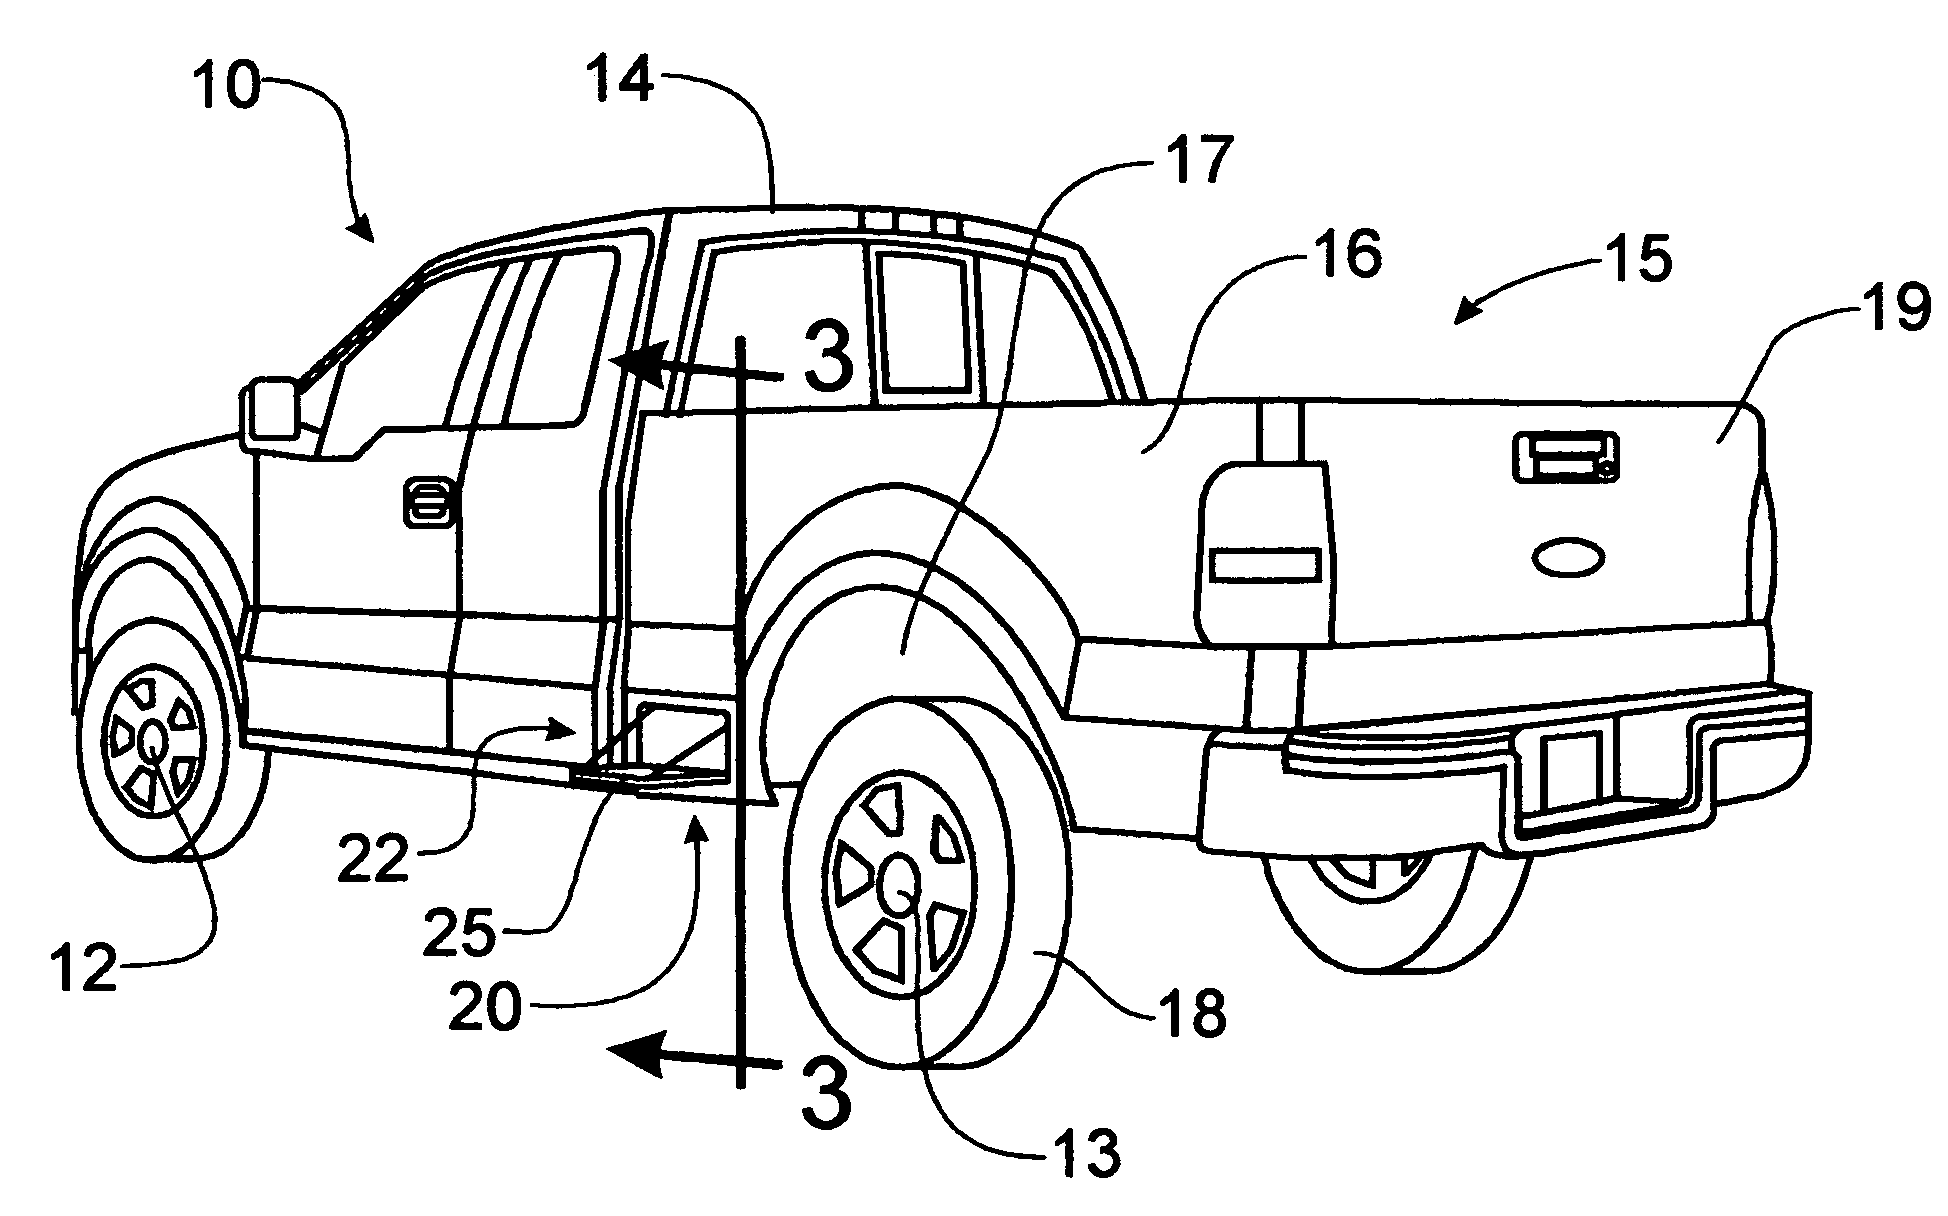 Storage compartment and step for pick-up trucks